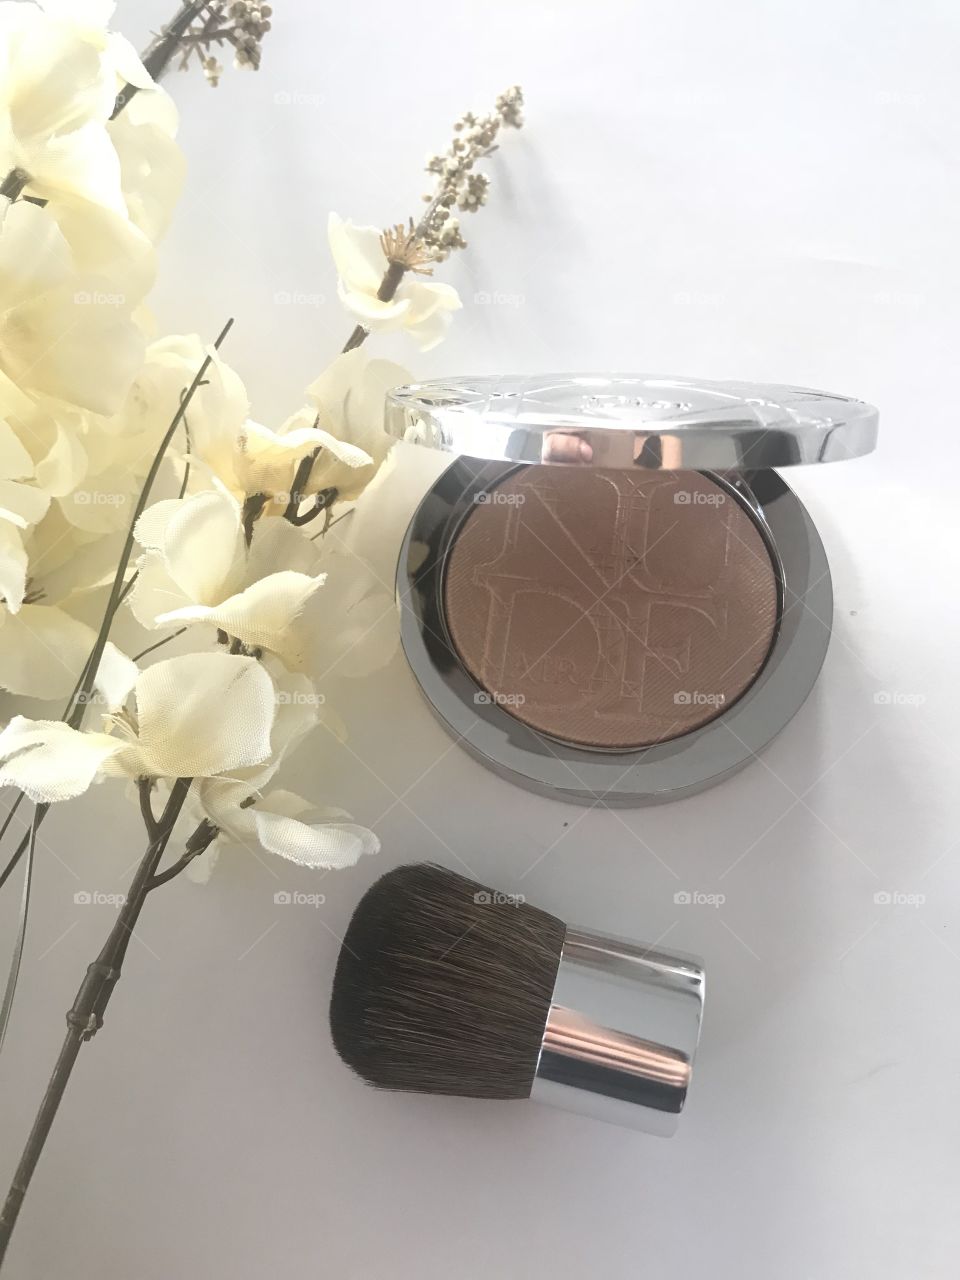 Dior makeup highlighter. Luxury makeup such as dior and yves st Laurent are high end and this photograph extremely well. 